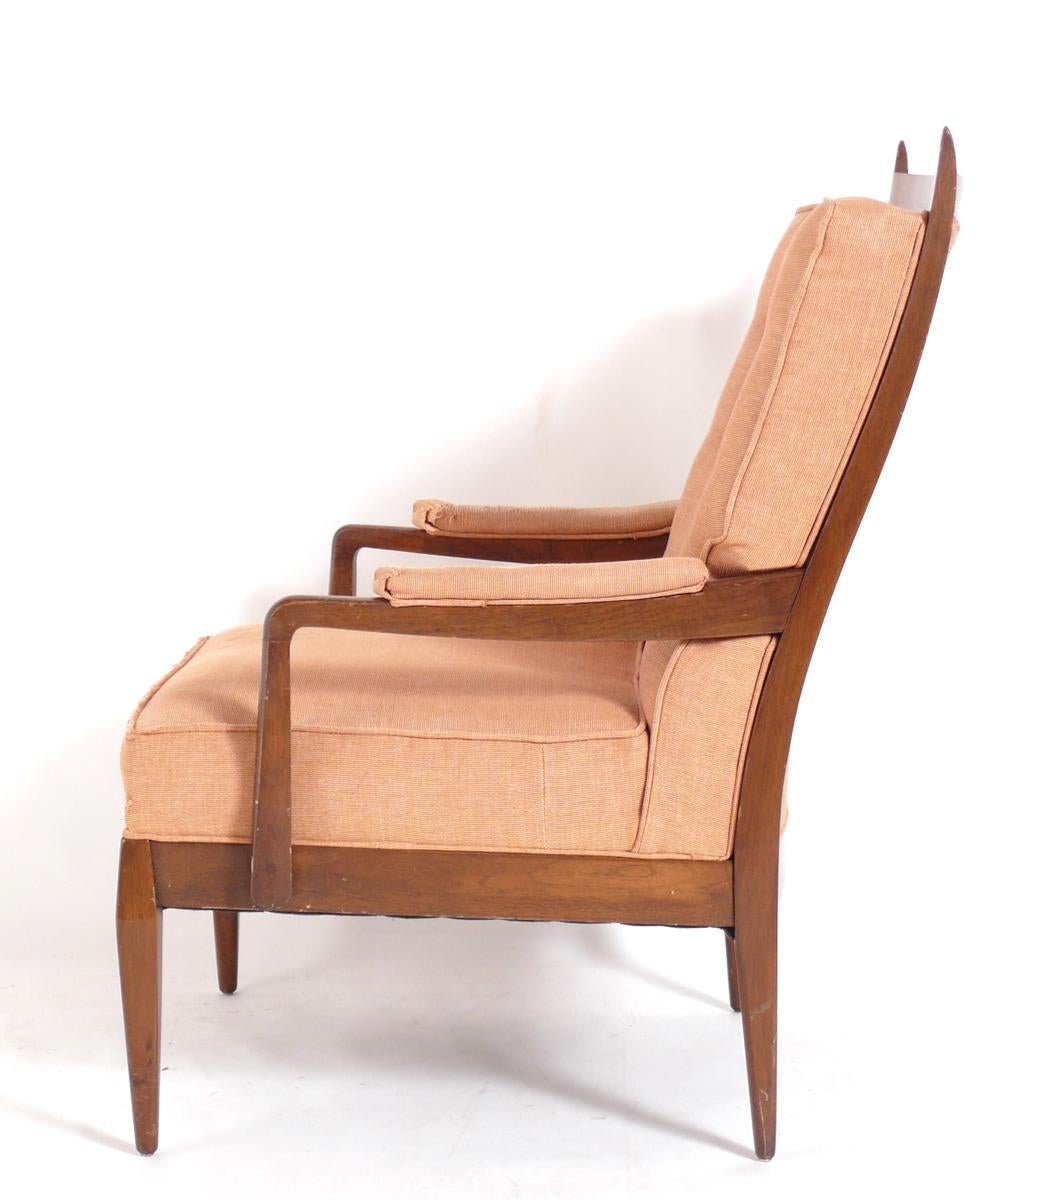 Tall Curvaceous Antler Back Lounge chair, attributed to Edward Wormley for Dunbar, unsigned, American, circa 1950s. This chair is currently being refinished and reupholstered and can be completed in your choice of finish color and upholstered in